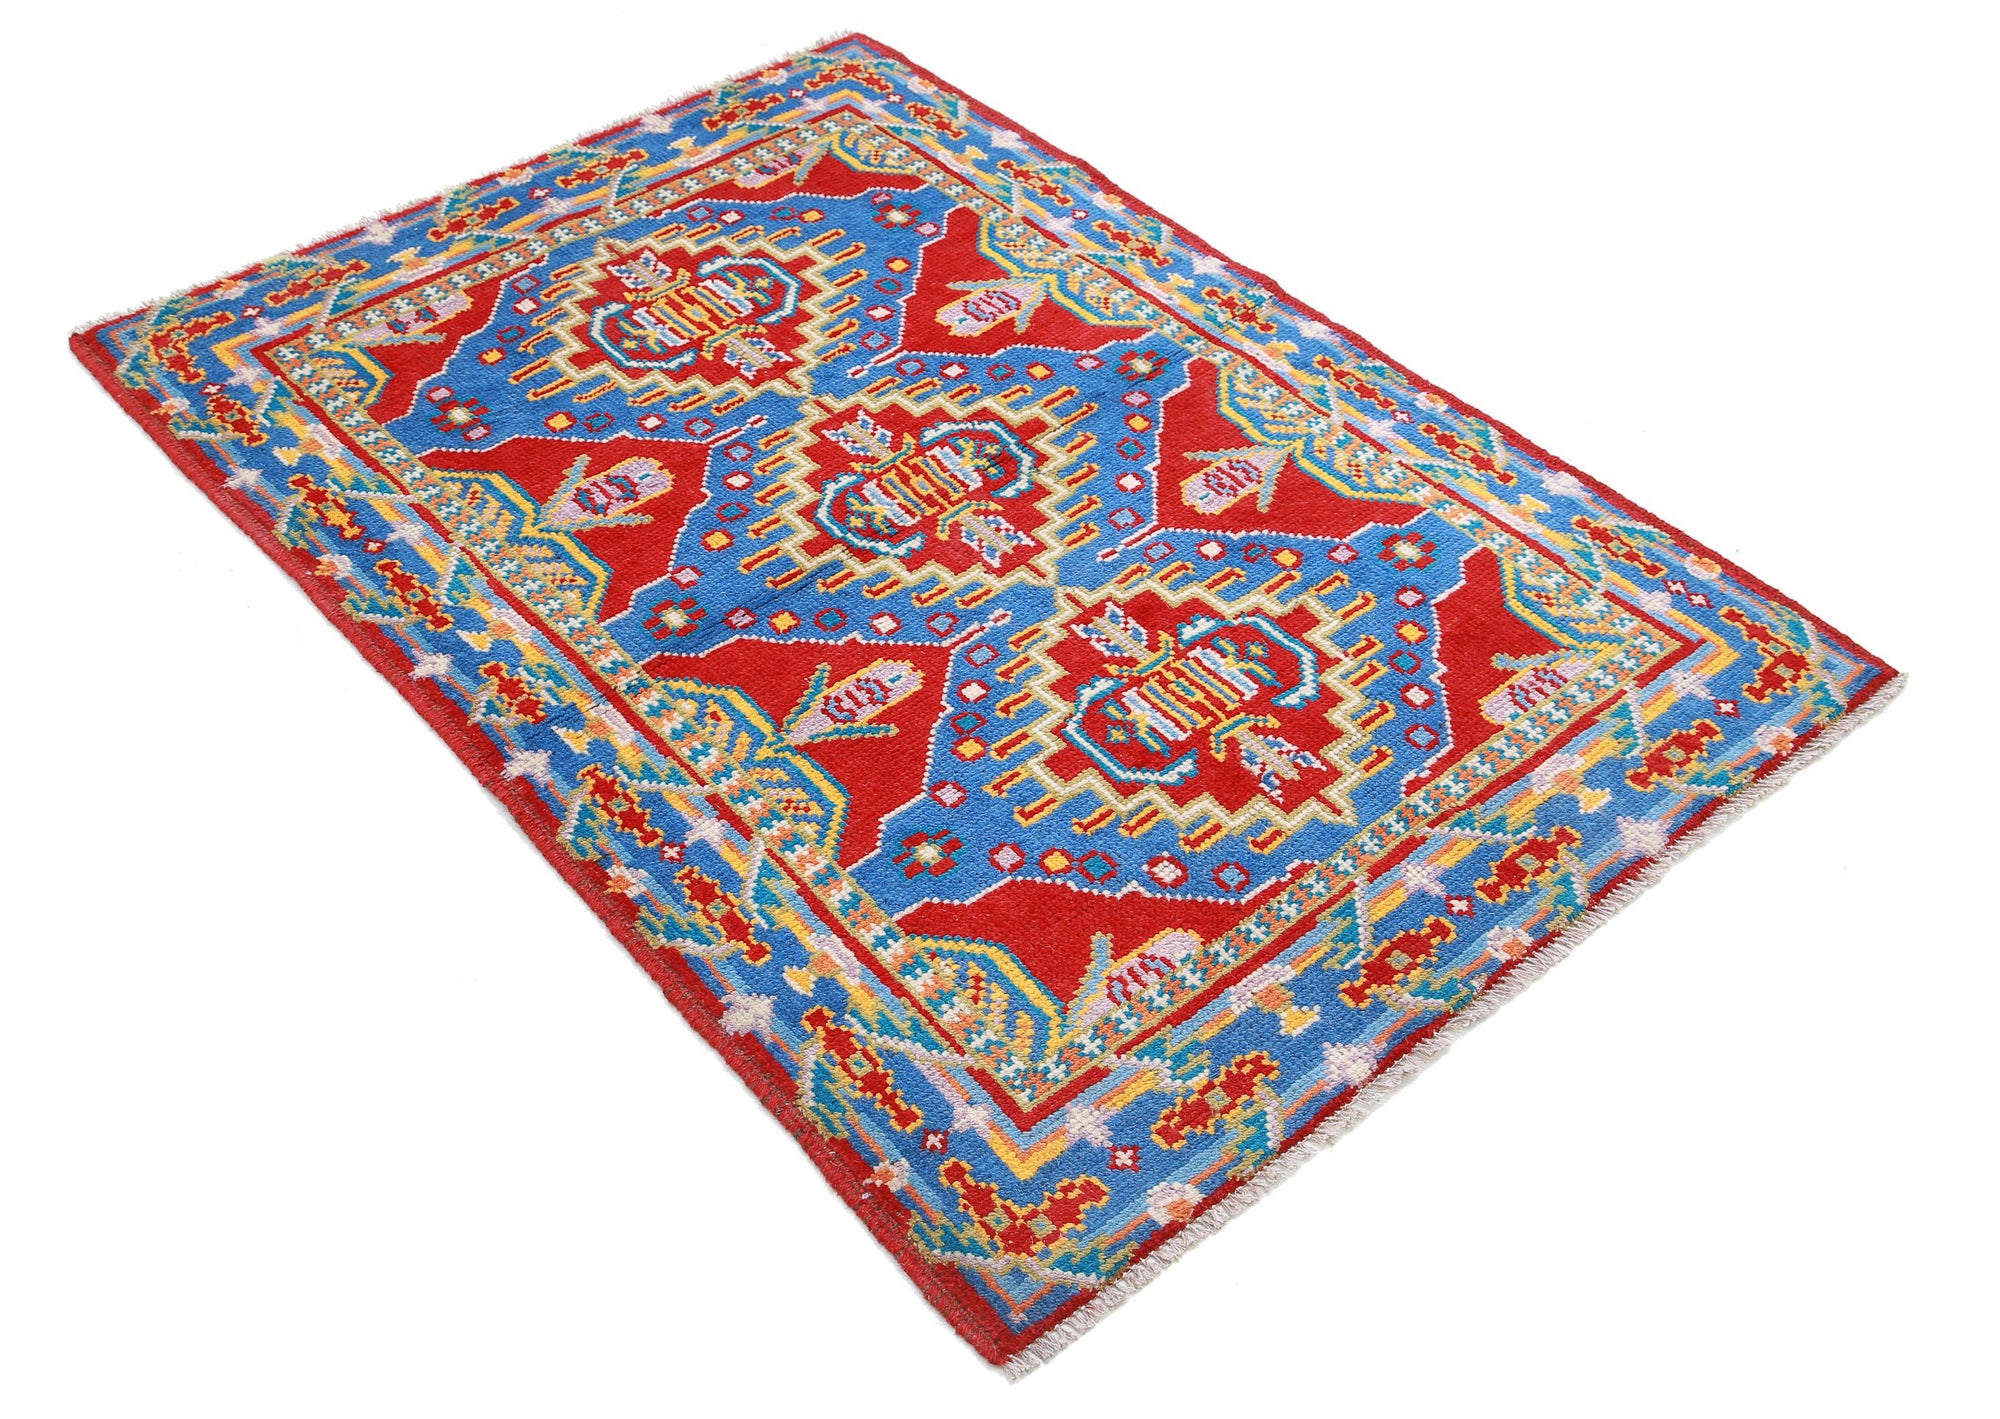 Revival-hand-knotted-qarghani-wool-rug-5014207-1.jpg